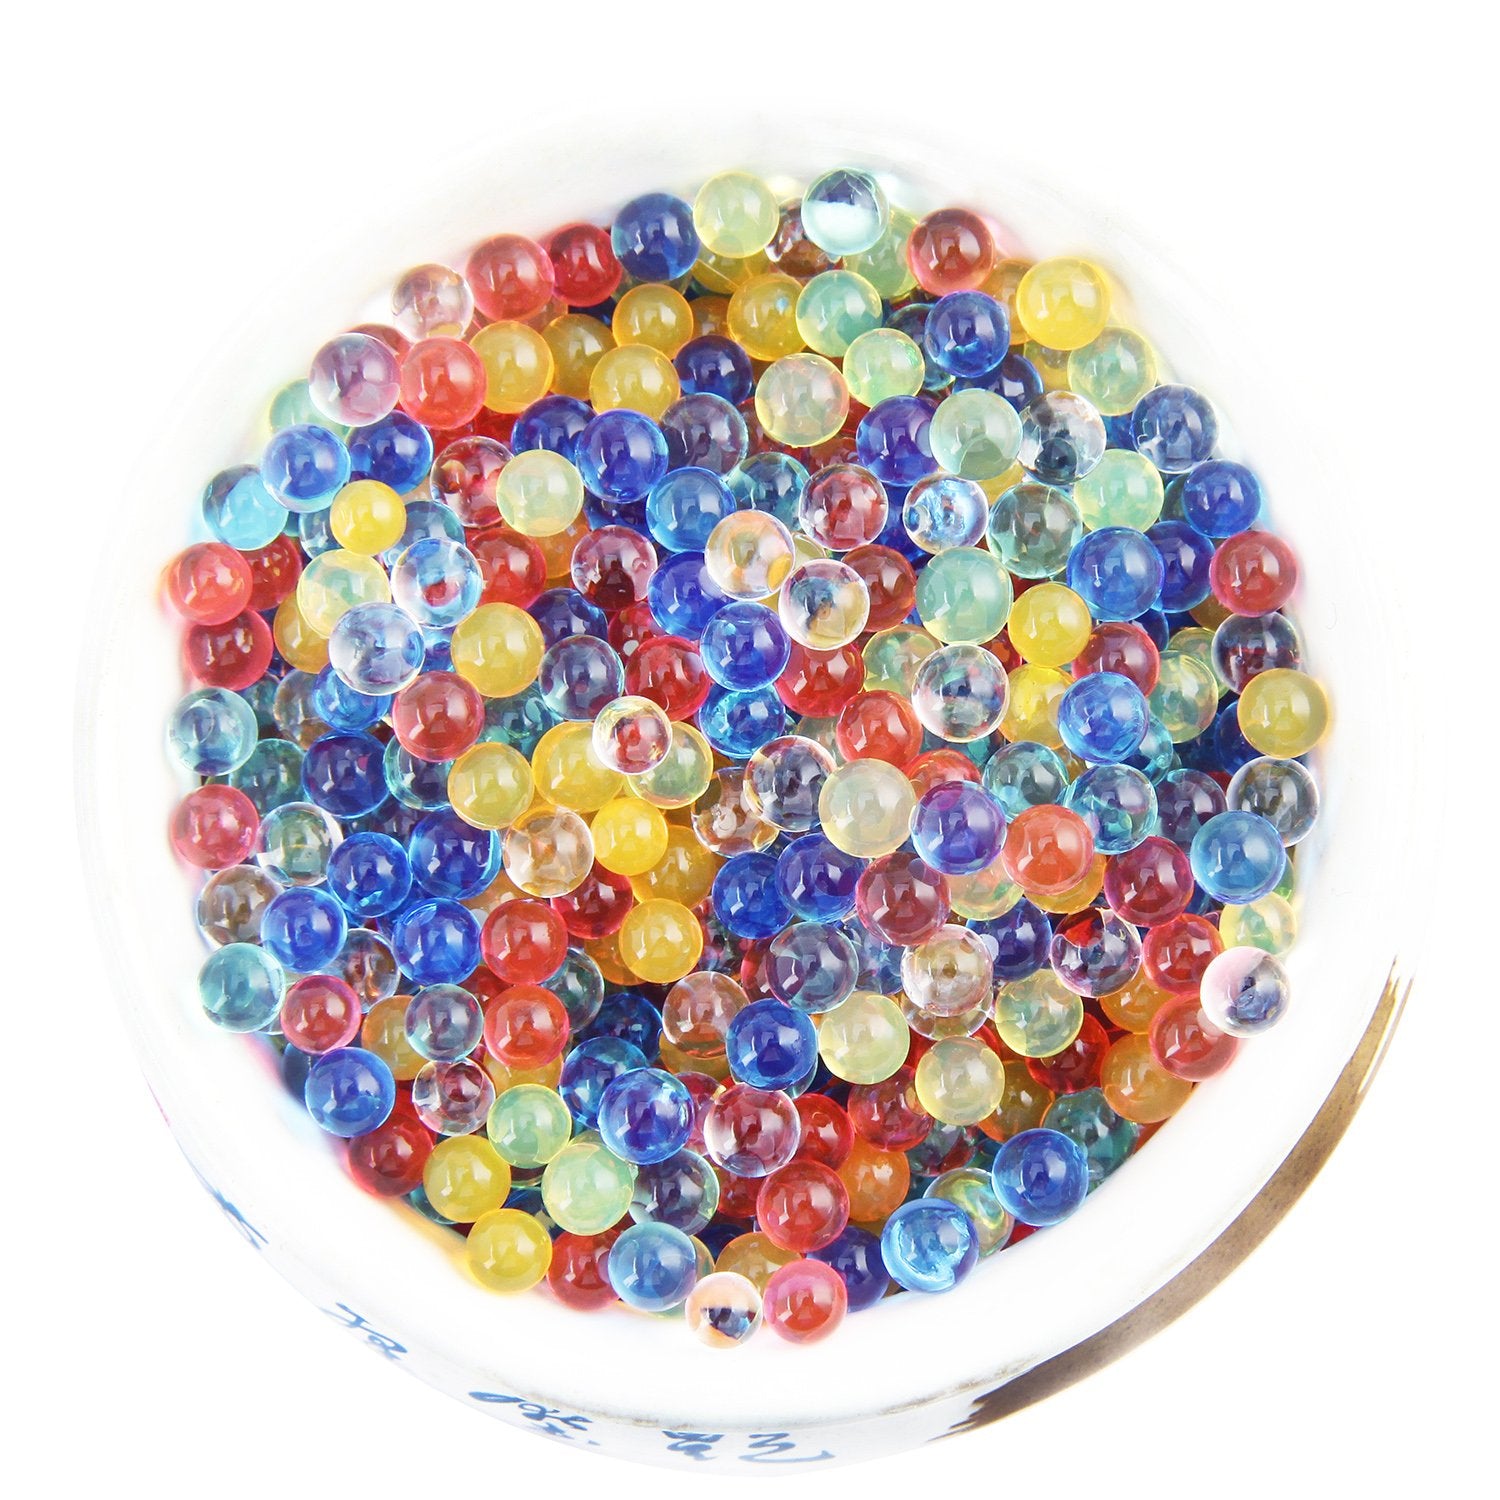 Elongdi Water Beads Pack Rainbow Mix 50,000 Beads Growing Balls, Jelly Water Gel Beads for Spa Refill, Kids Sensory Toys , Vases, Plant, Wedding and Home Decor